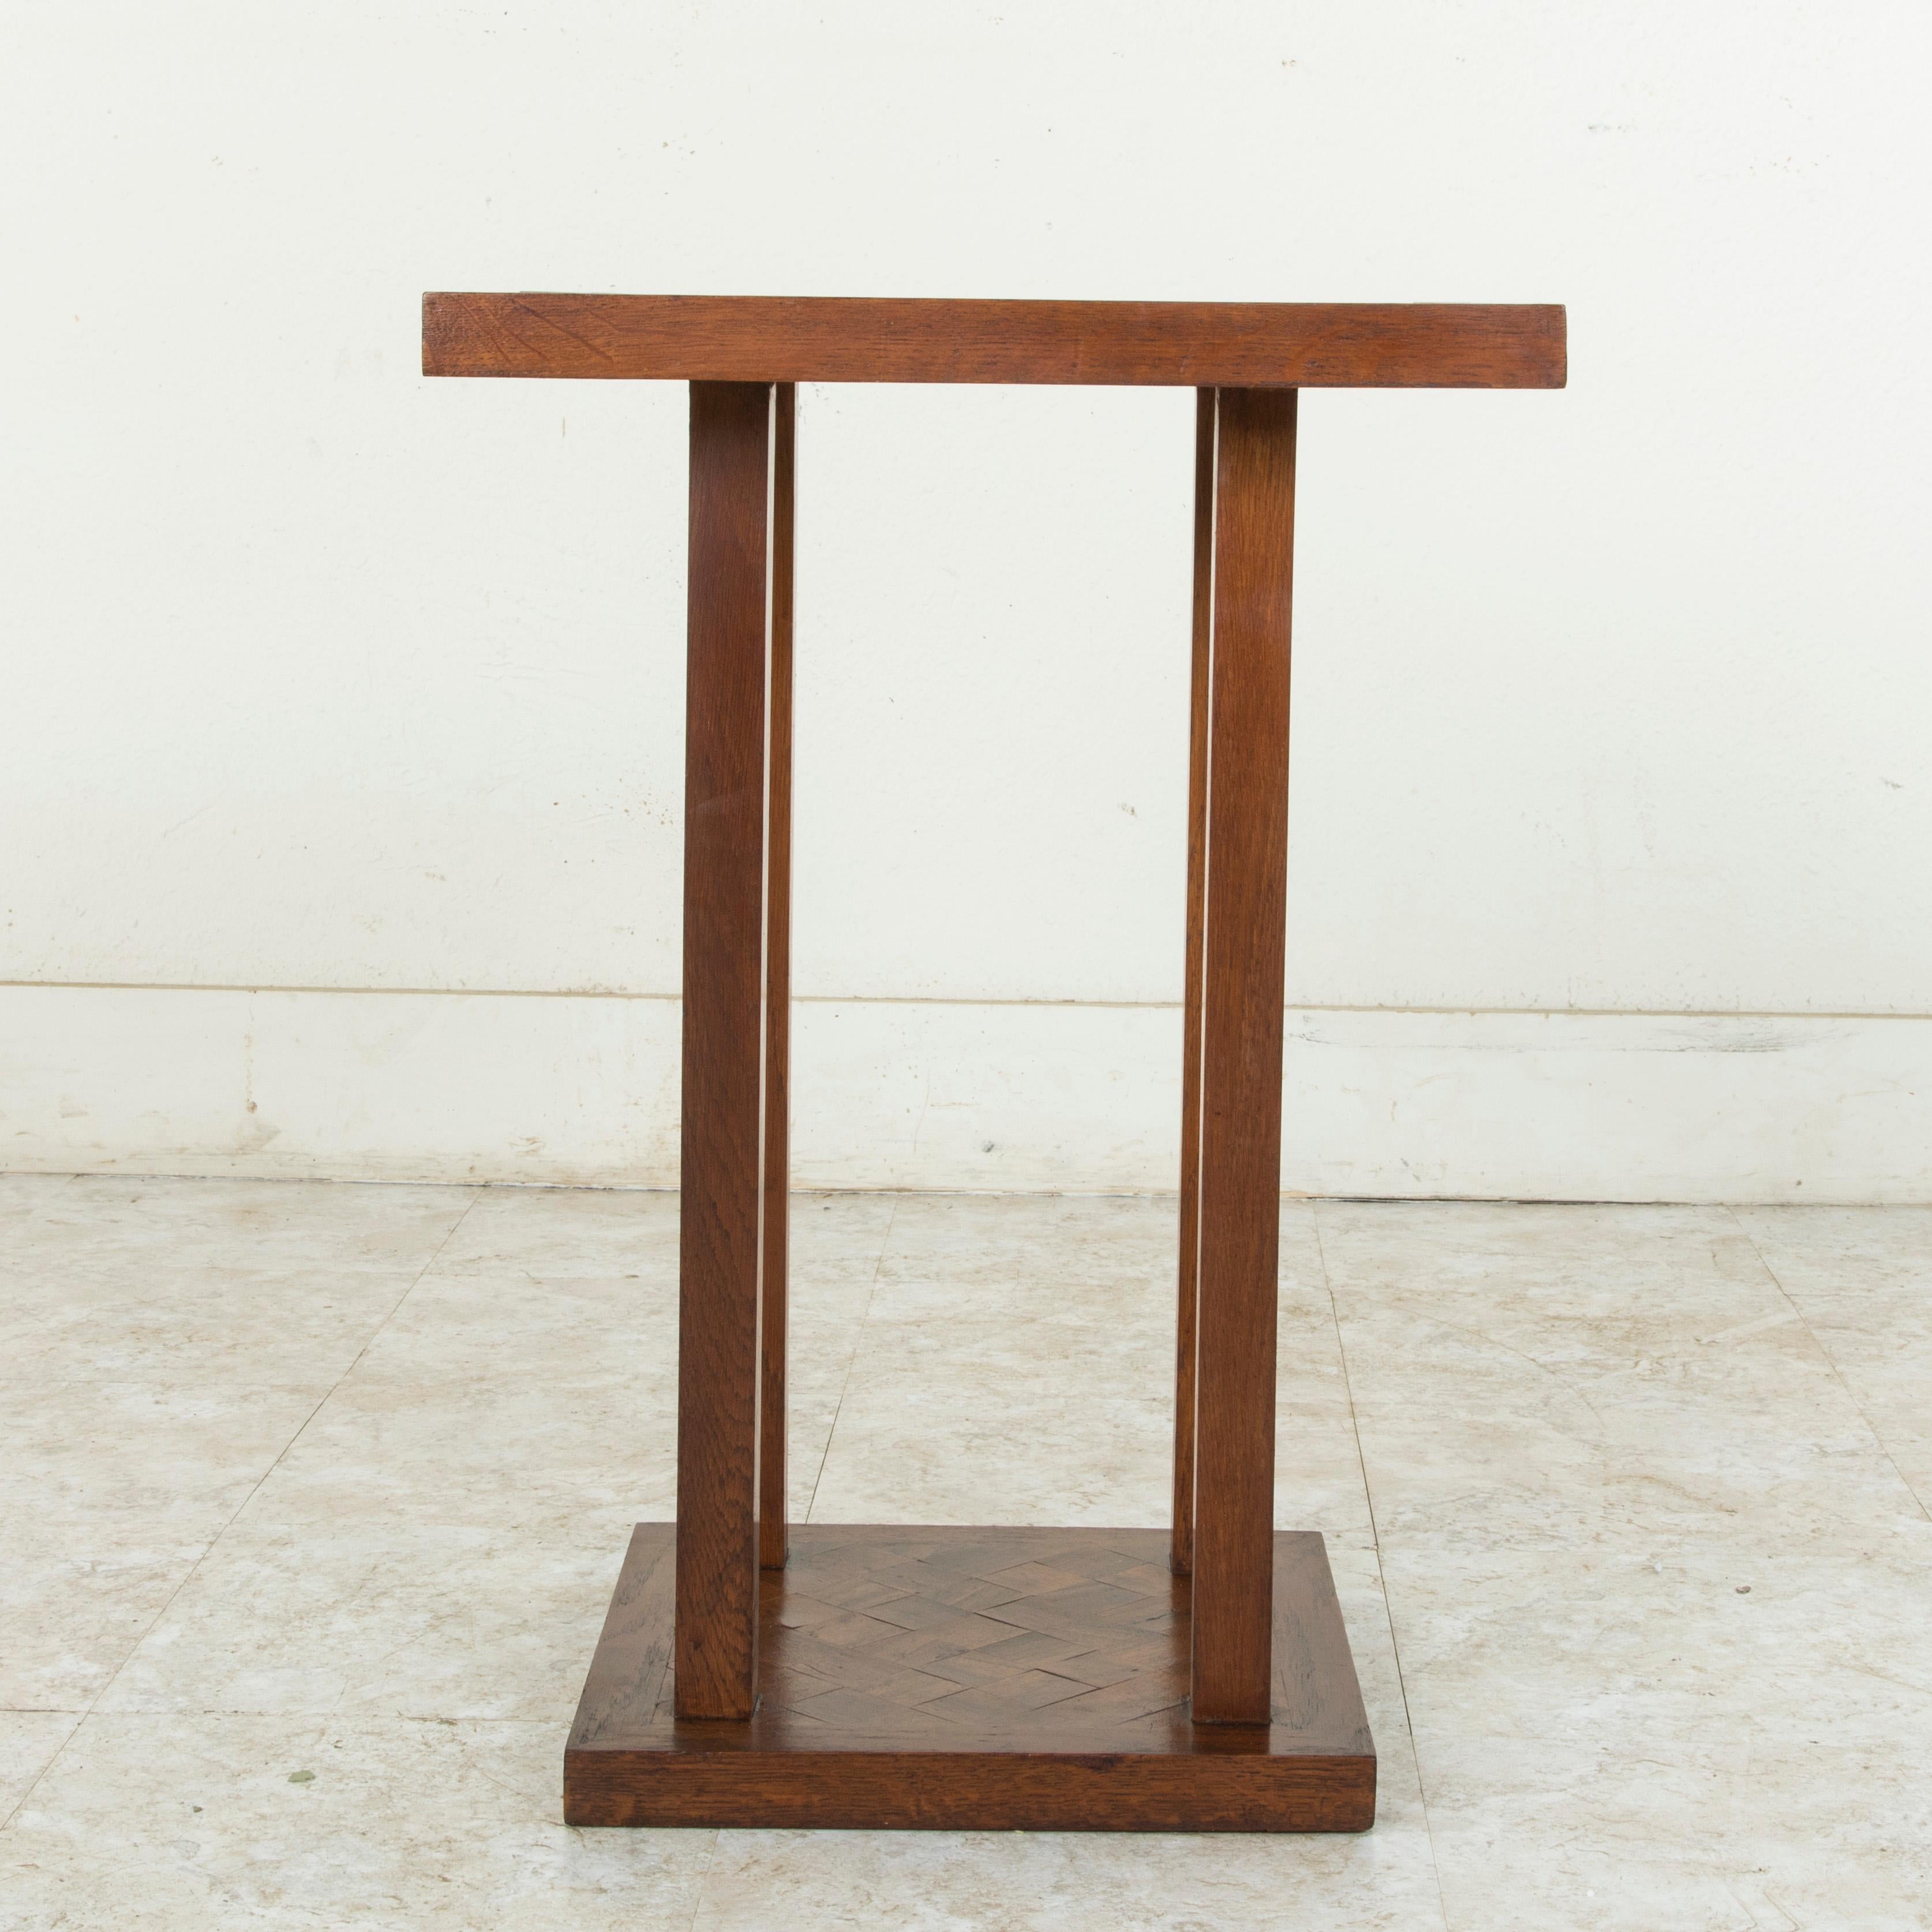 This mid-20th century French oak side table features a diamond pattern marquetry top made from one inch thick blocks. The square top is supported by four square legs that join to a lower platform. The lower platform repeats the diamond marquetry